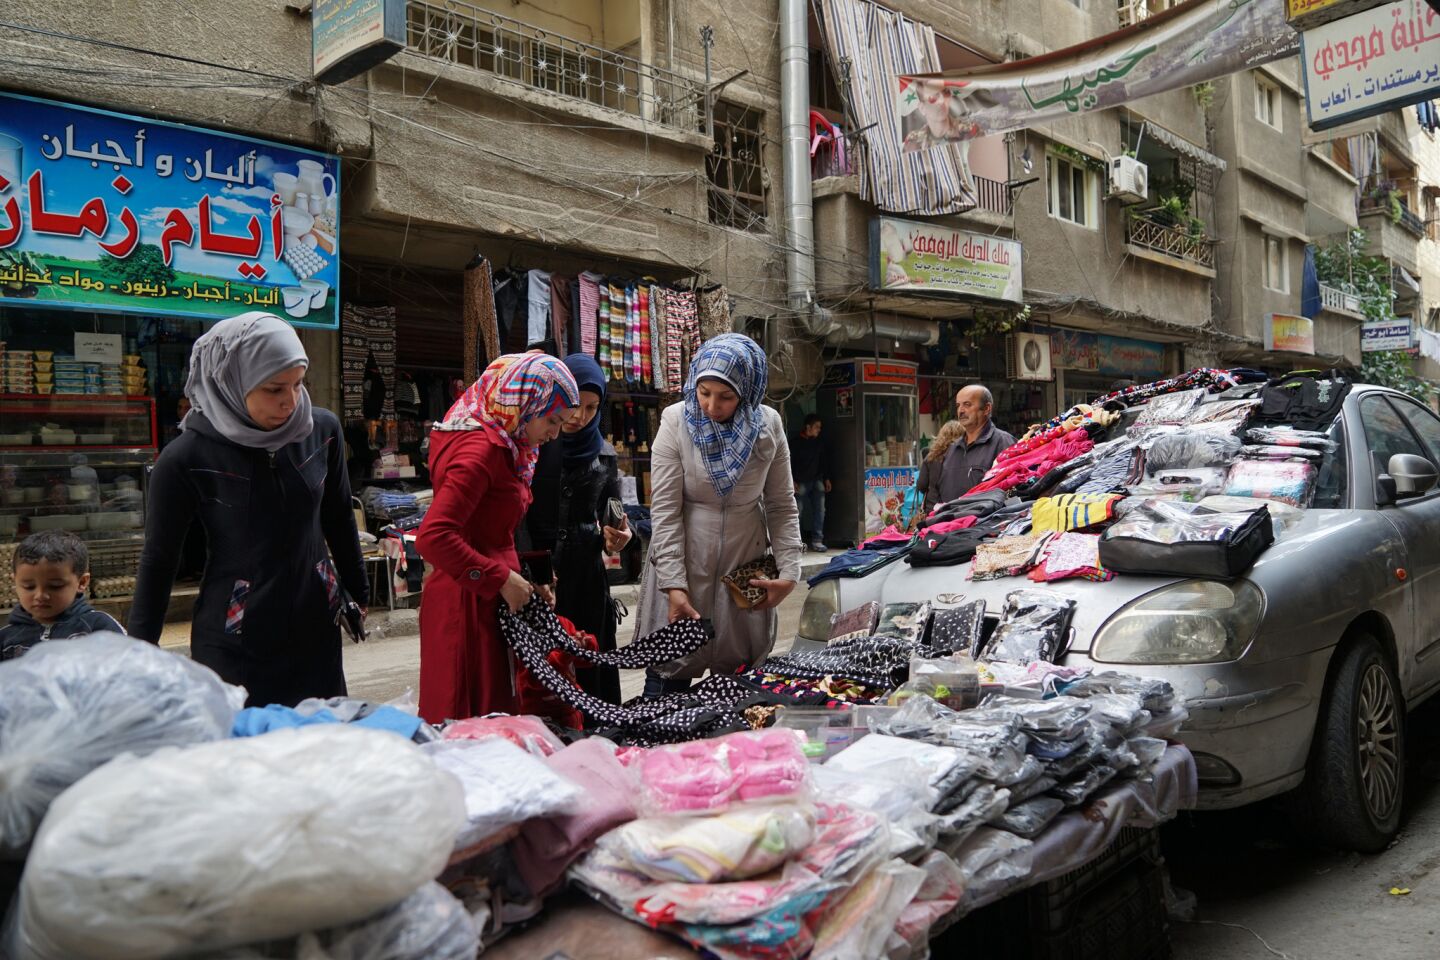 Women shop in Jaramana, a densely populated suburb of Damascus. The neighborhood, to which many people displaced by the war have moved, is under tight government control.